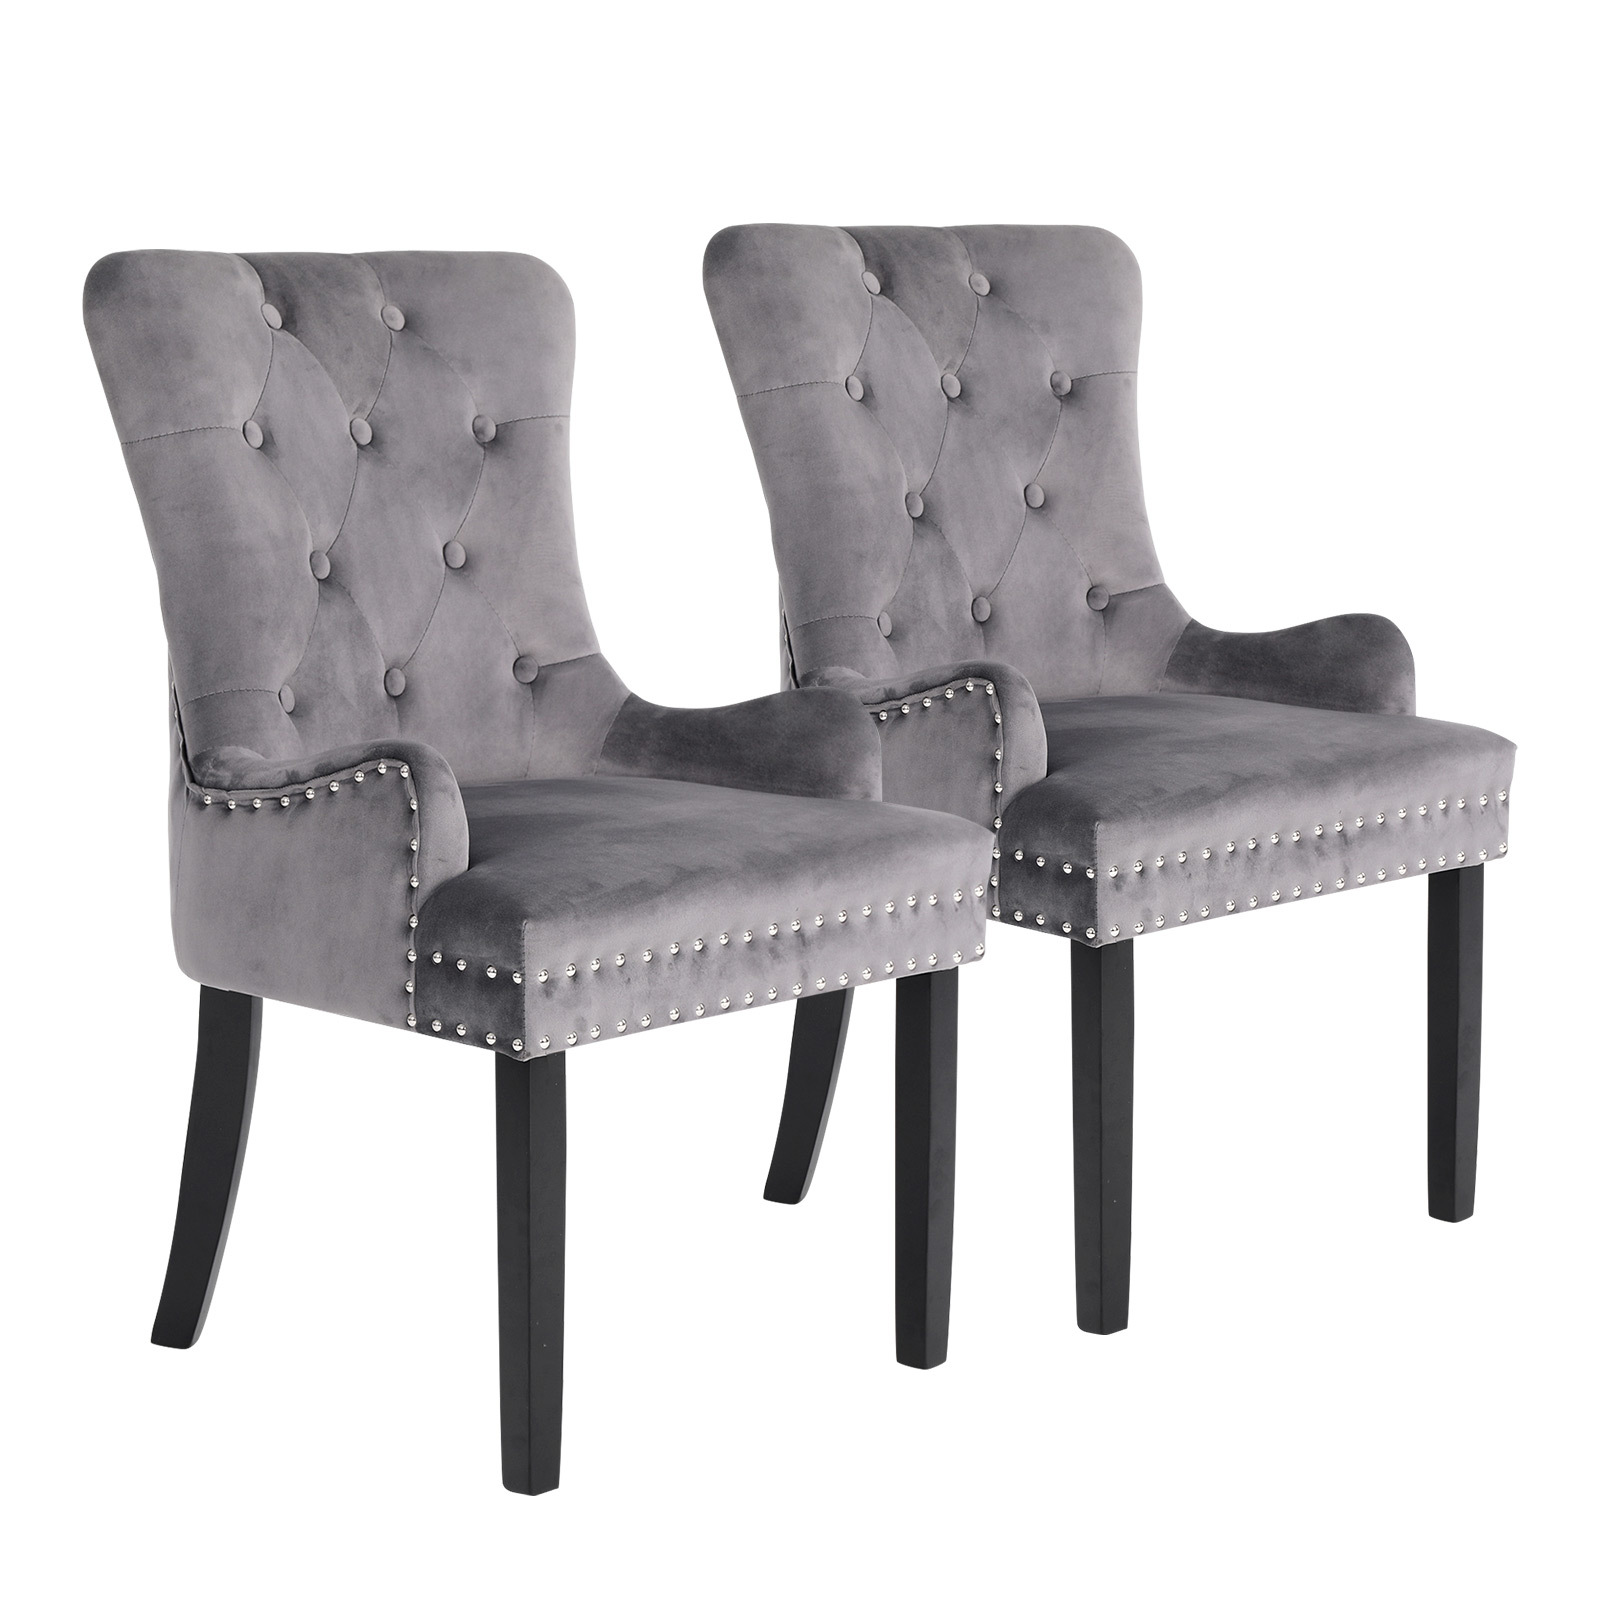 2X French Provincial Velvet with Ring Chair LISSE - GREY